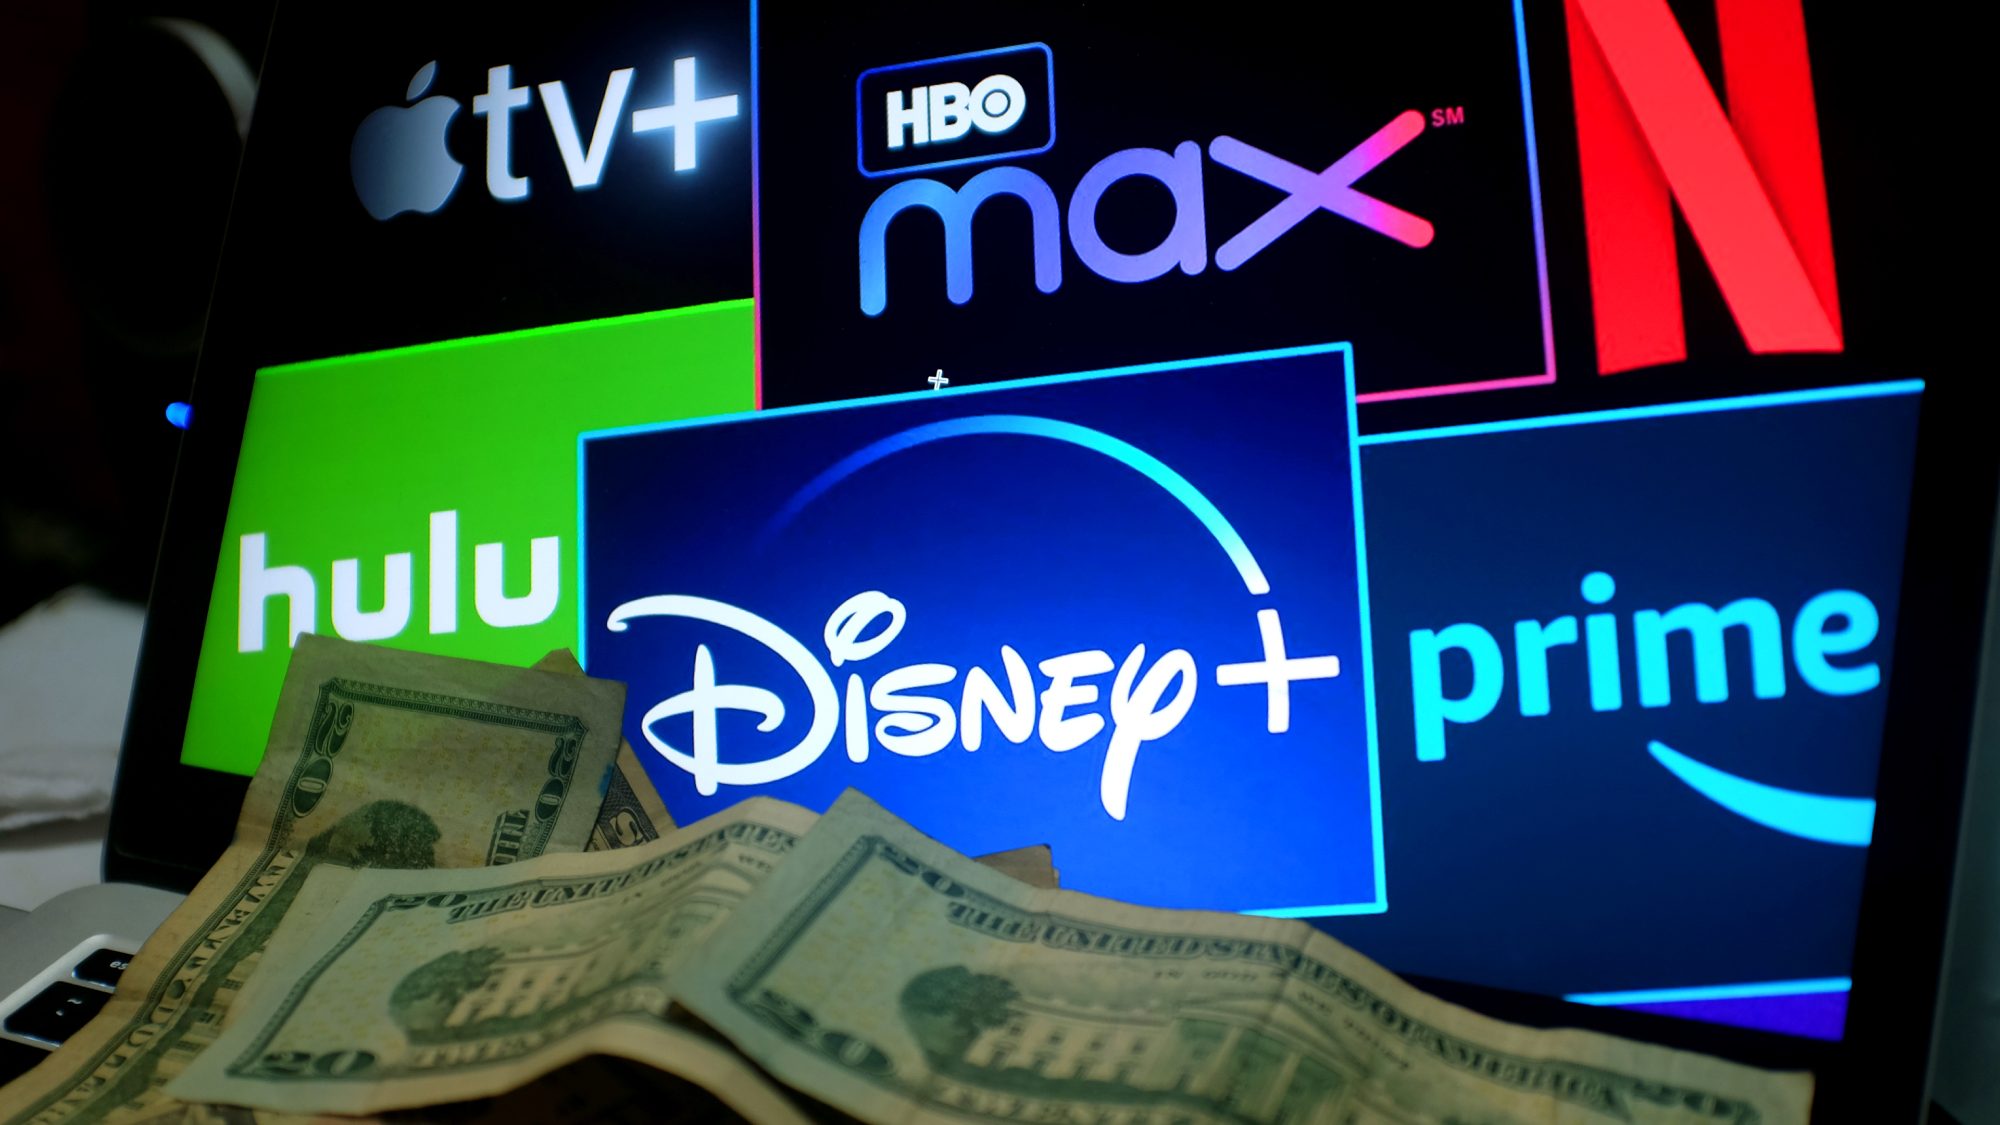 popular streaming services including Apple TV+, HBO Max, Netflix, Hulu, Disney+, and Amazon Prime with dollar bills in the foreground